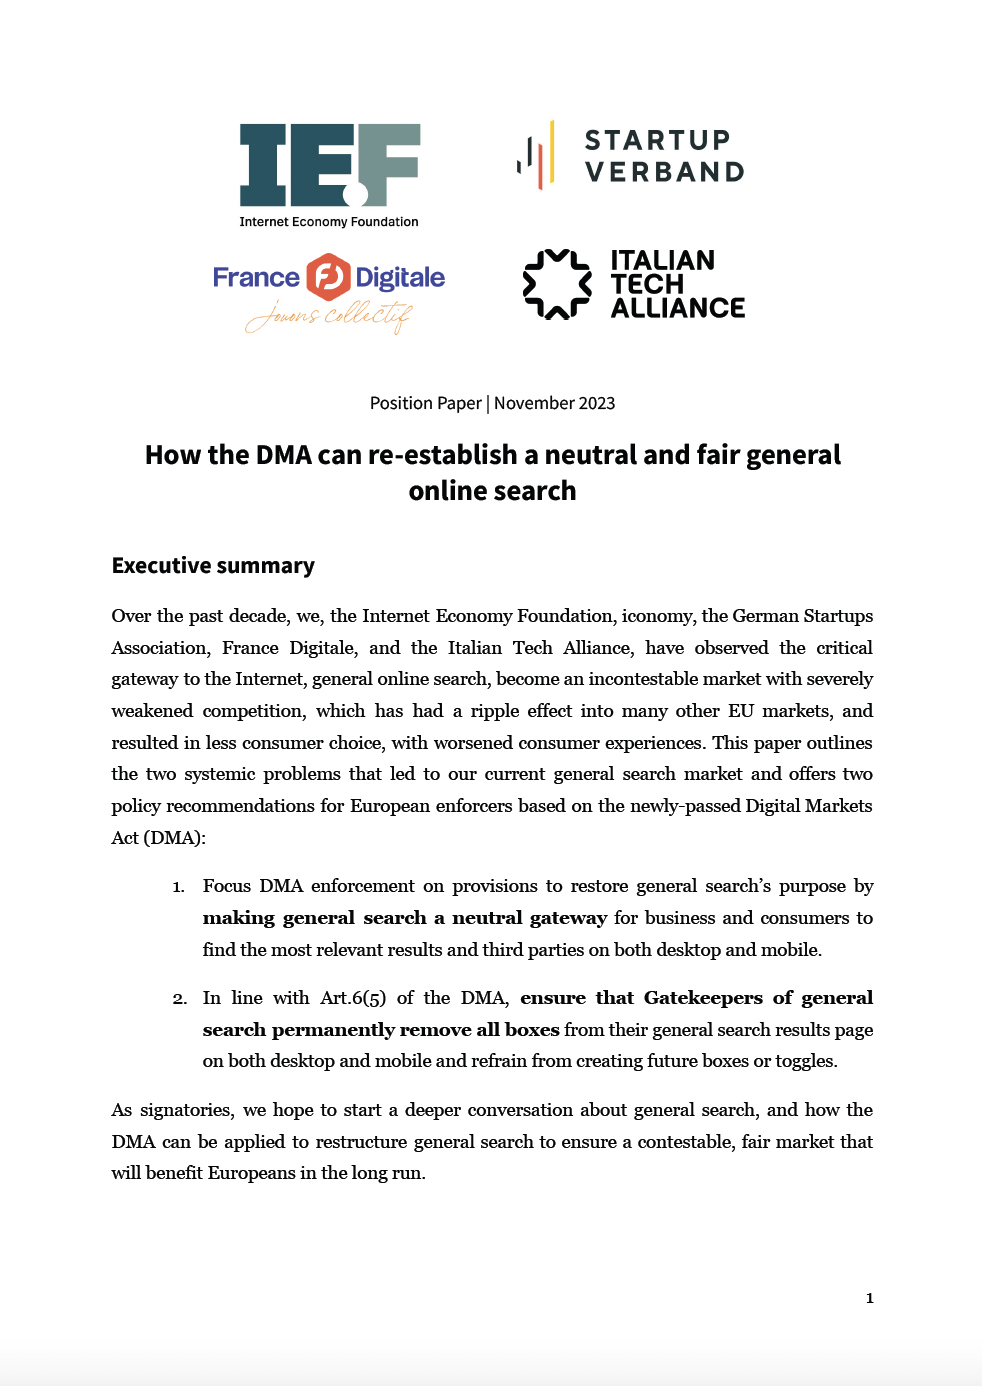 New Position Paper: How the DMA can re-establish a neutral and fair general online search